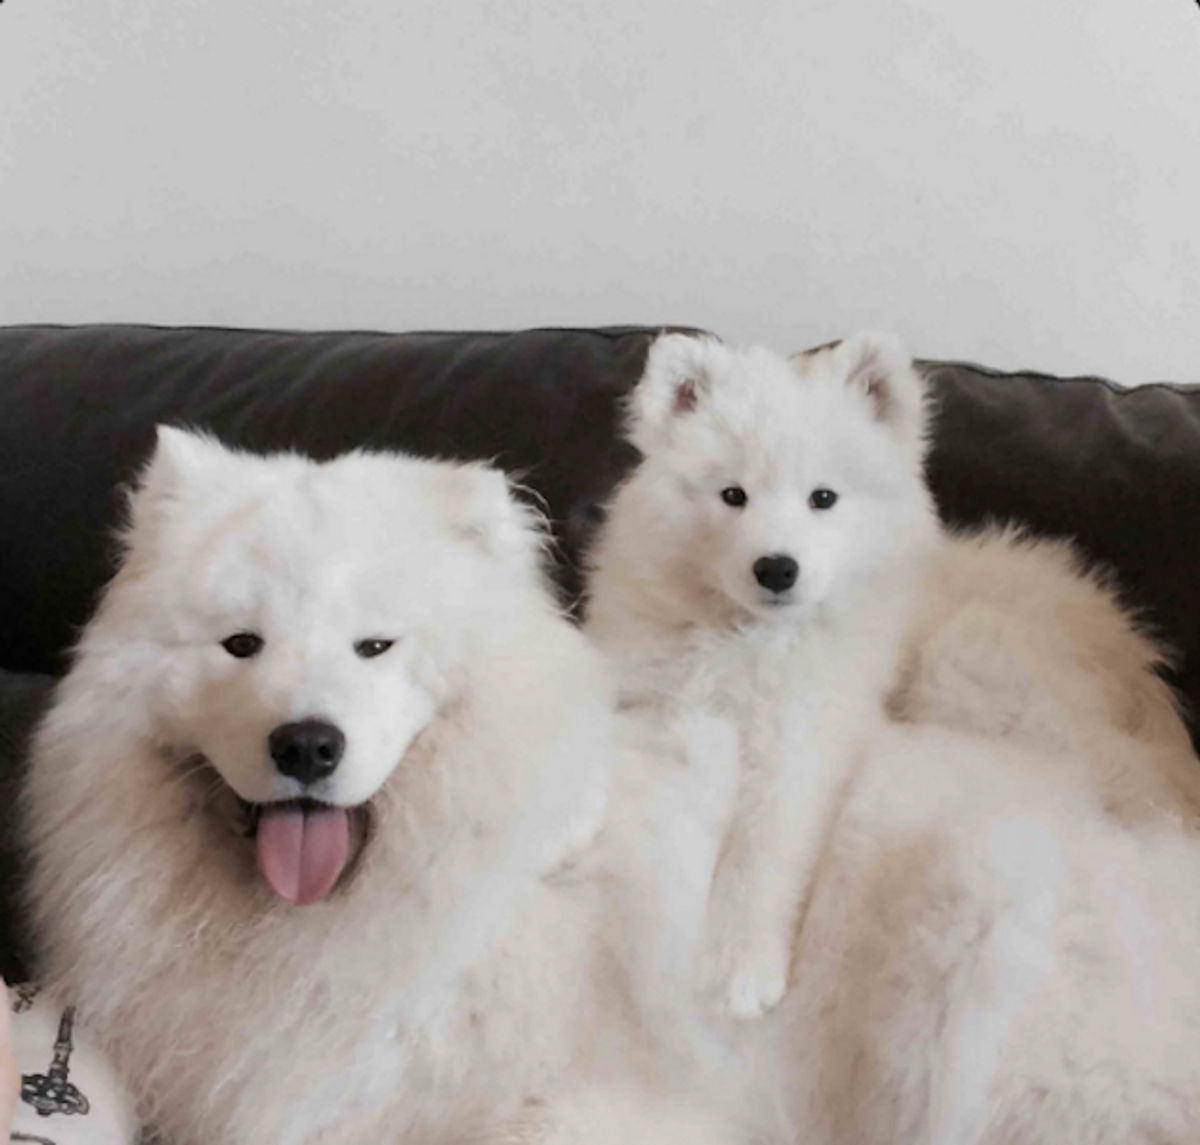 Several White Fluffy Dogs To Make Any Day Better